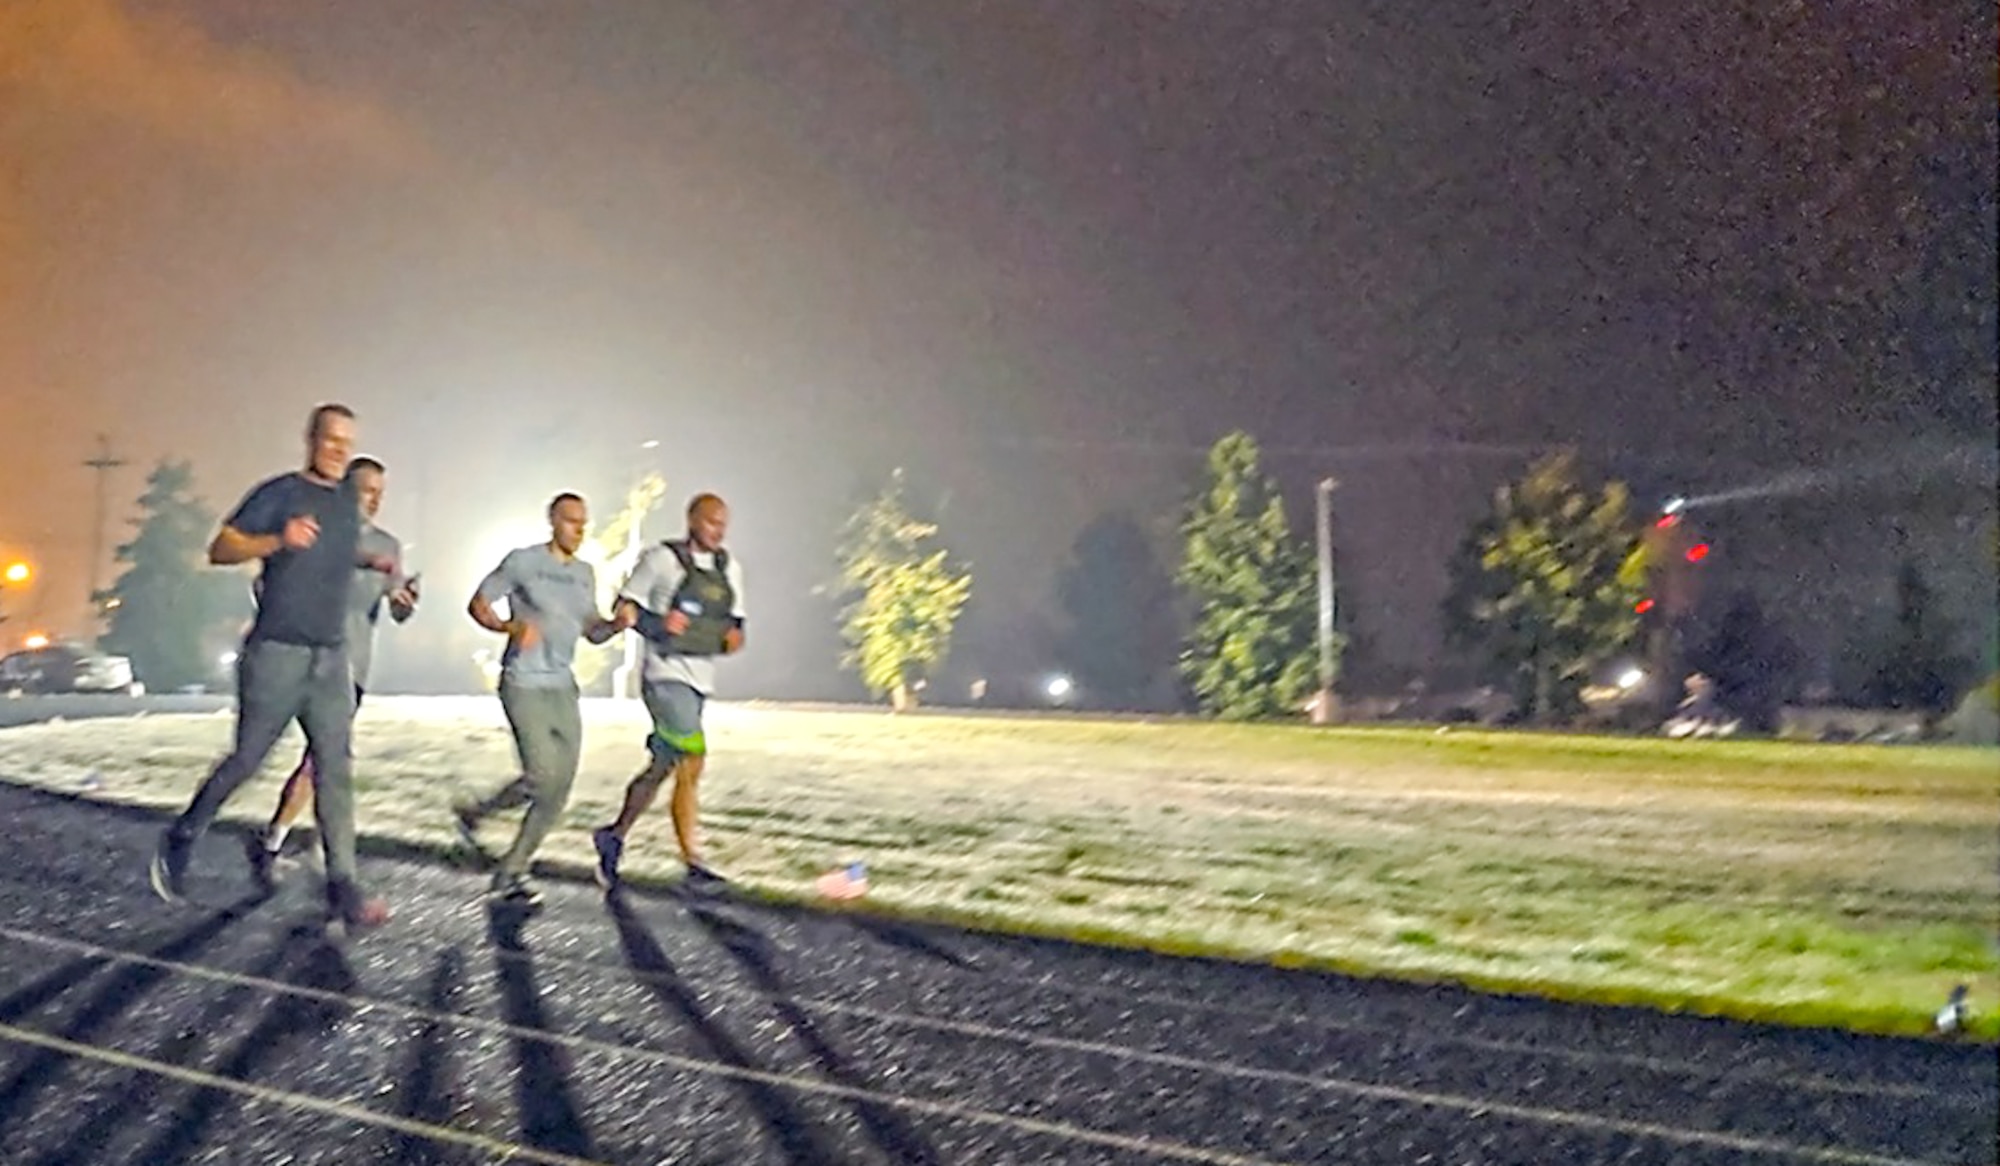 Members of the 225th Air Defense Squadron, lead by their commander Col. Brian Bergren (left), run during the early morning hours Sept. 19, 2019 during the POW/MIA Remembrance Run on Joint Base Lewis-McChord. (Courtesy photo)